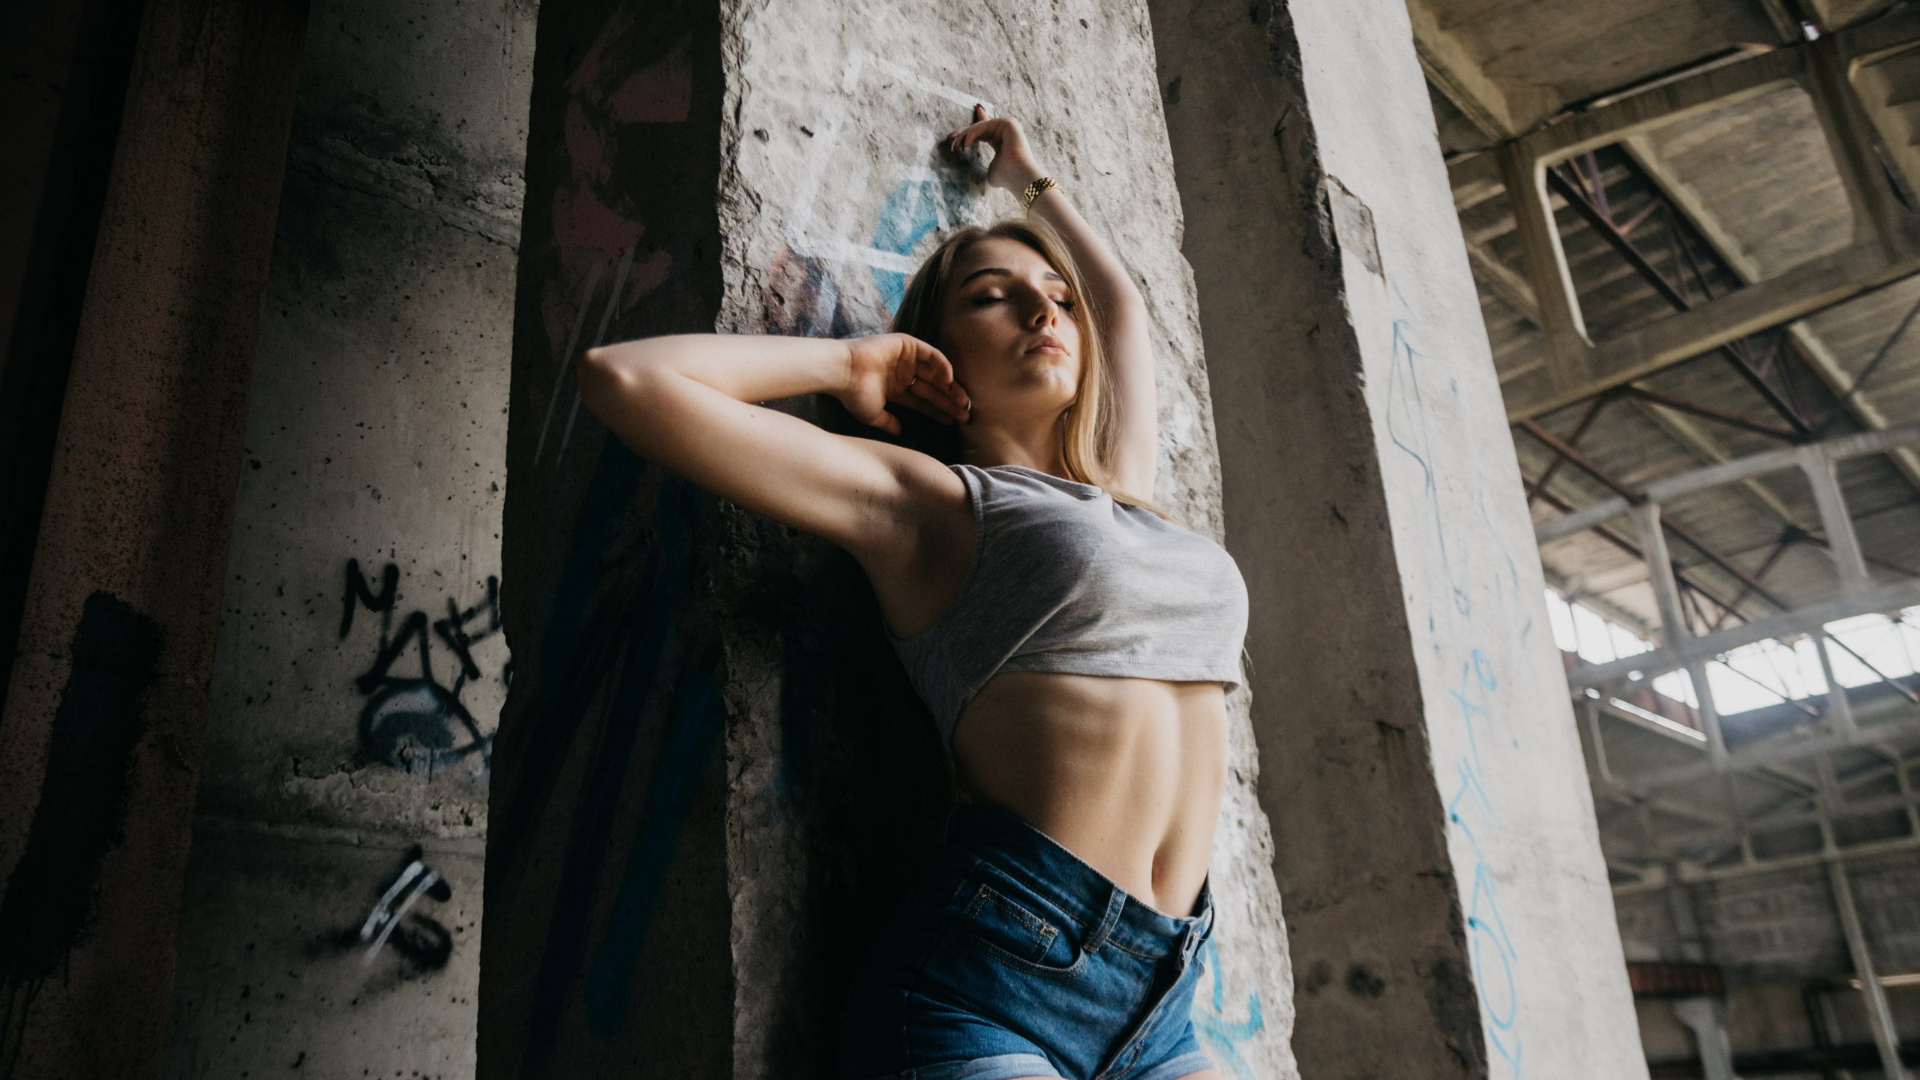 People 1920x1080 jean shorts smooth body crop top blonde photography belly belly button makeup graffiti armpits closed eyes model women long hair low-angle